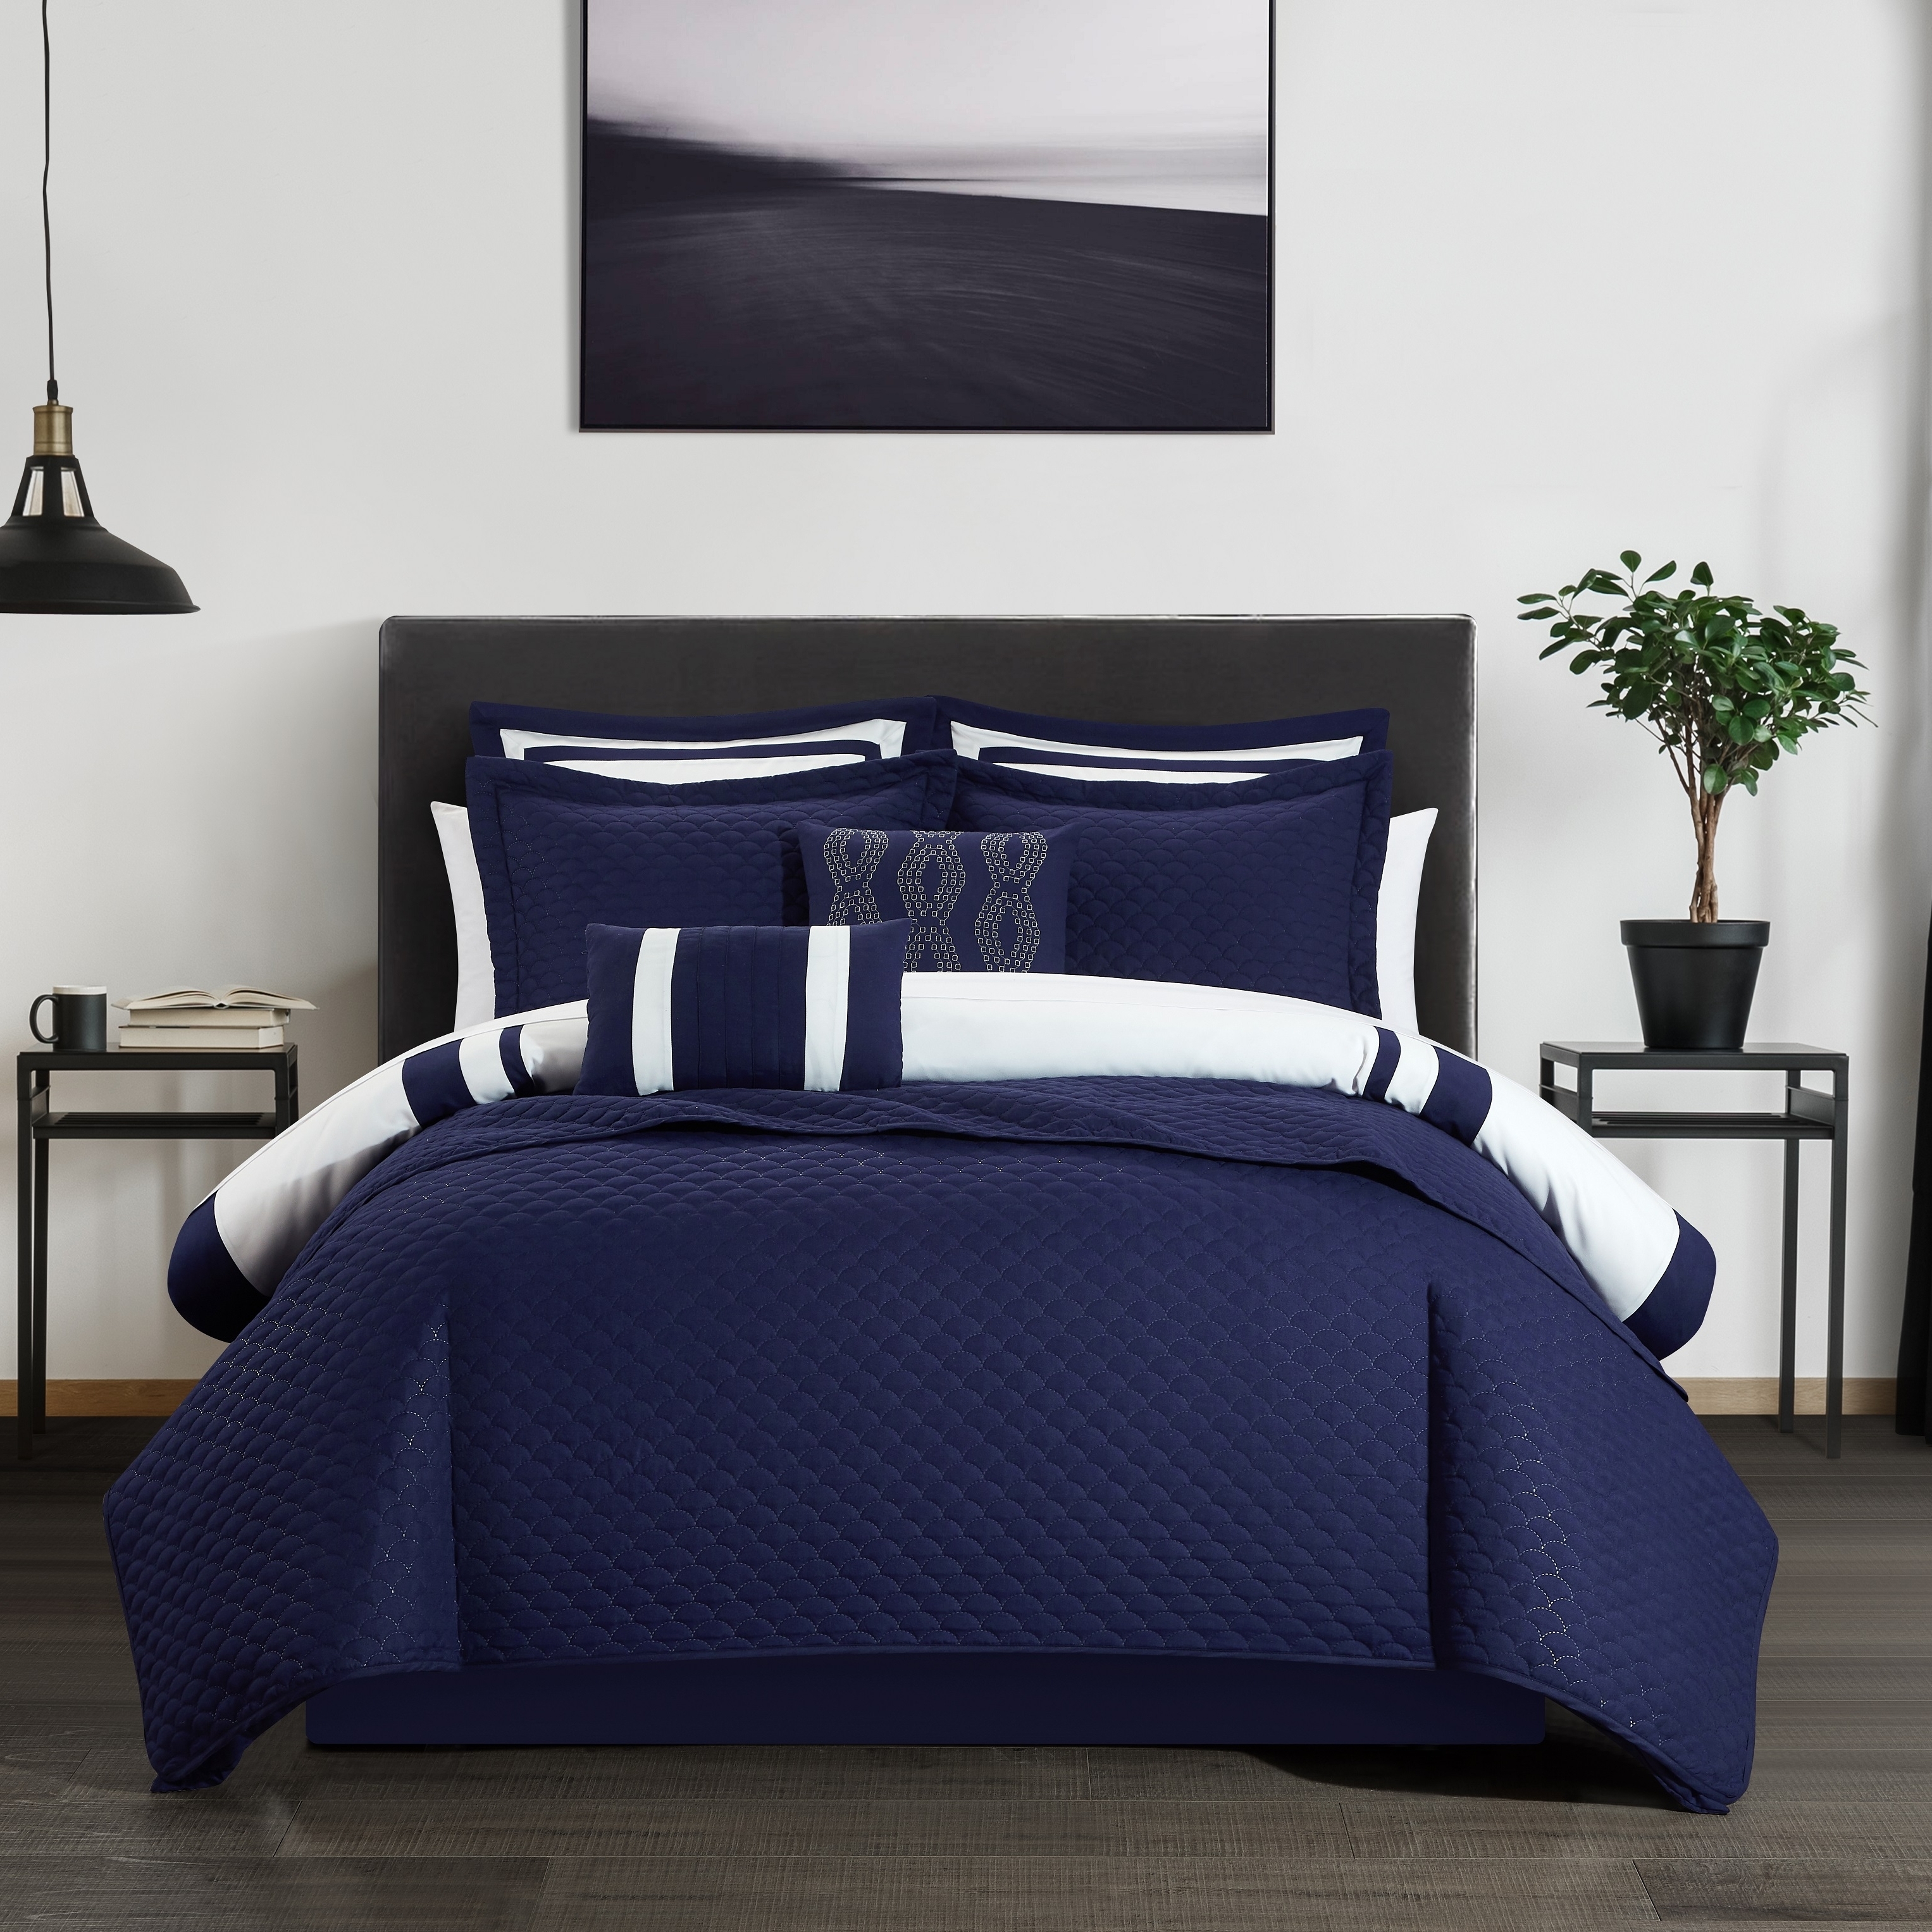 Hortense 8 Or 6 Piece Comforter And Quilt Set Hotel Collection - Navy, Queen - 8 Piece